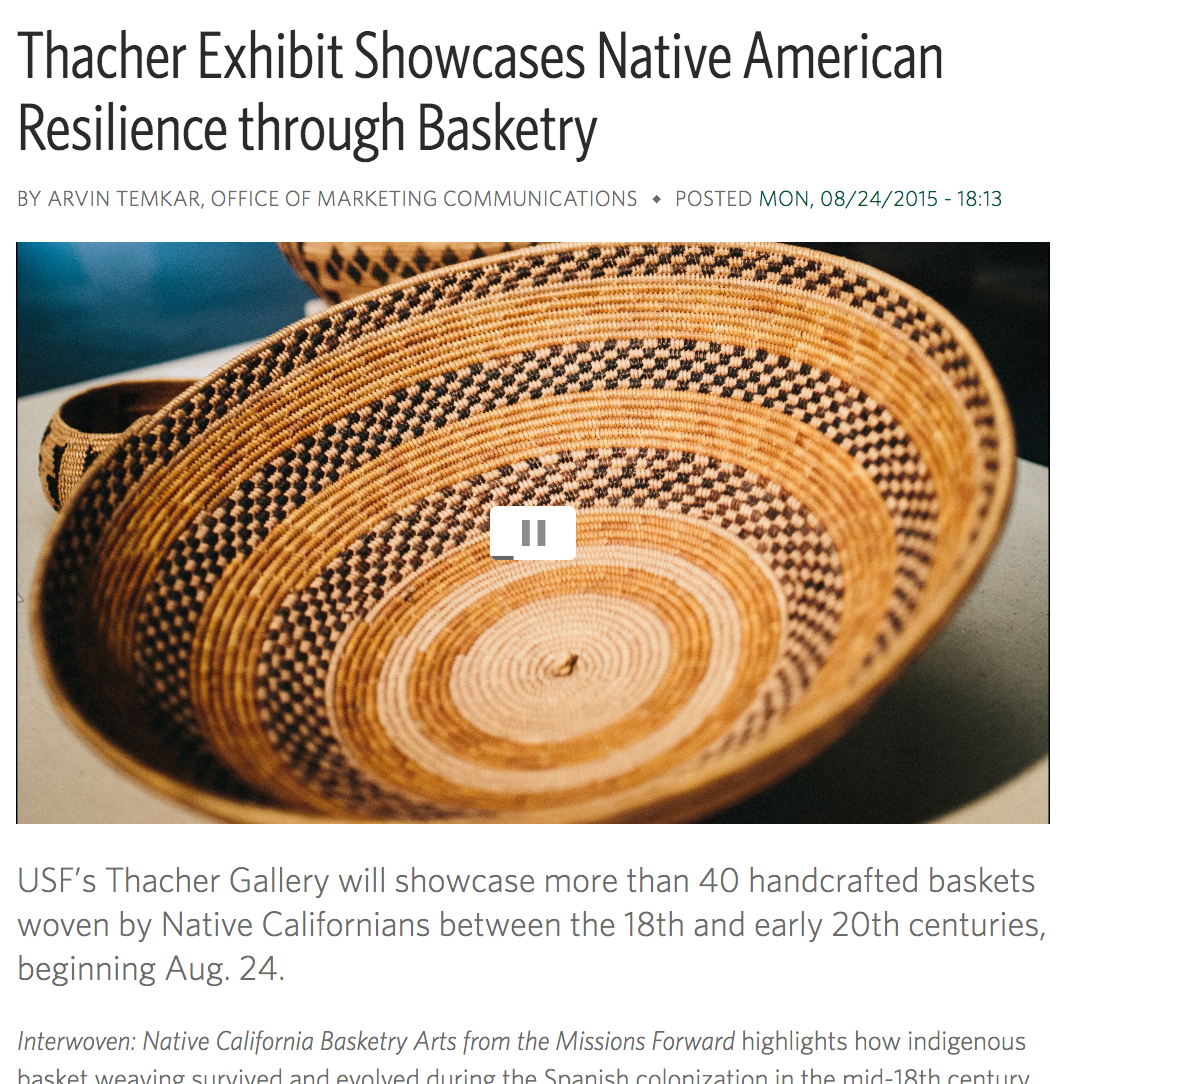 https://www.usfca.edu/news/thacher-exhibit-showcases-native-american-resilience-through-basketry